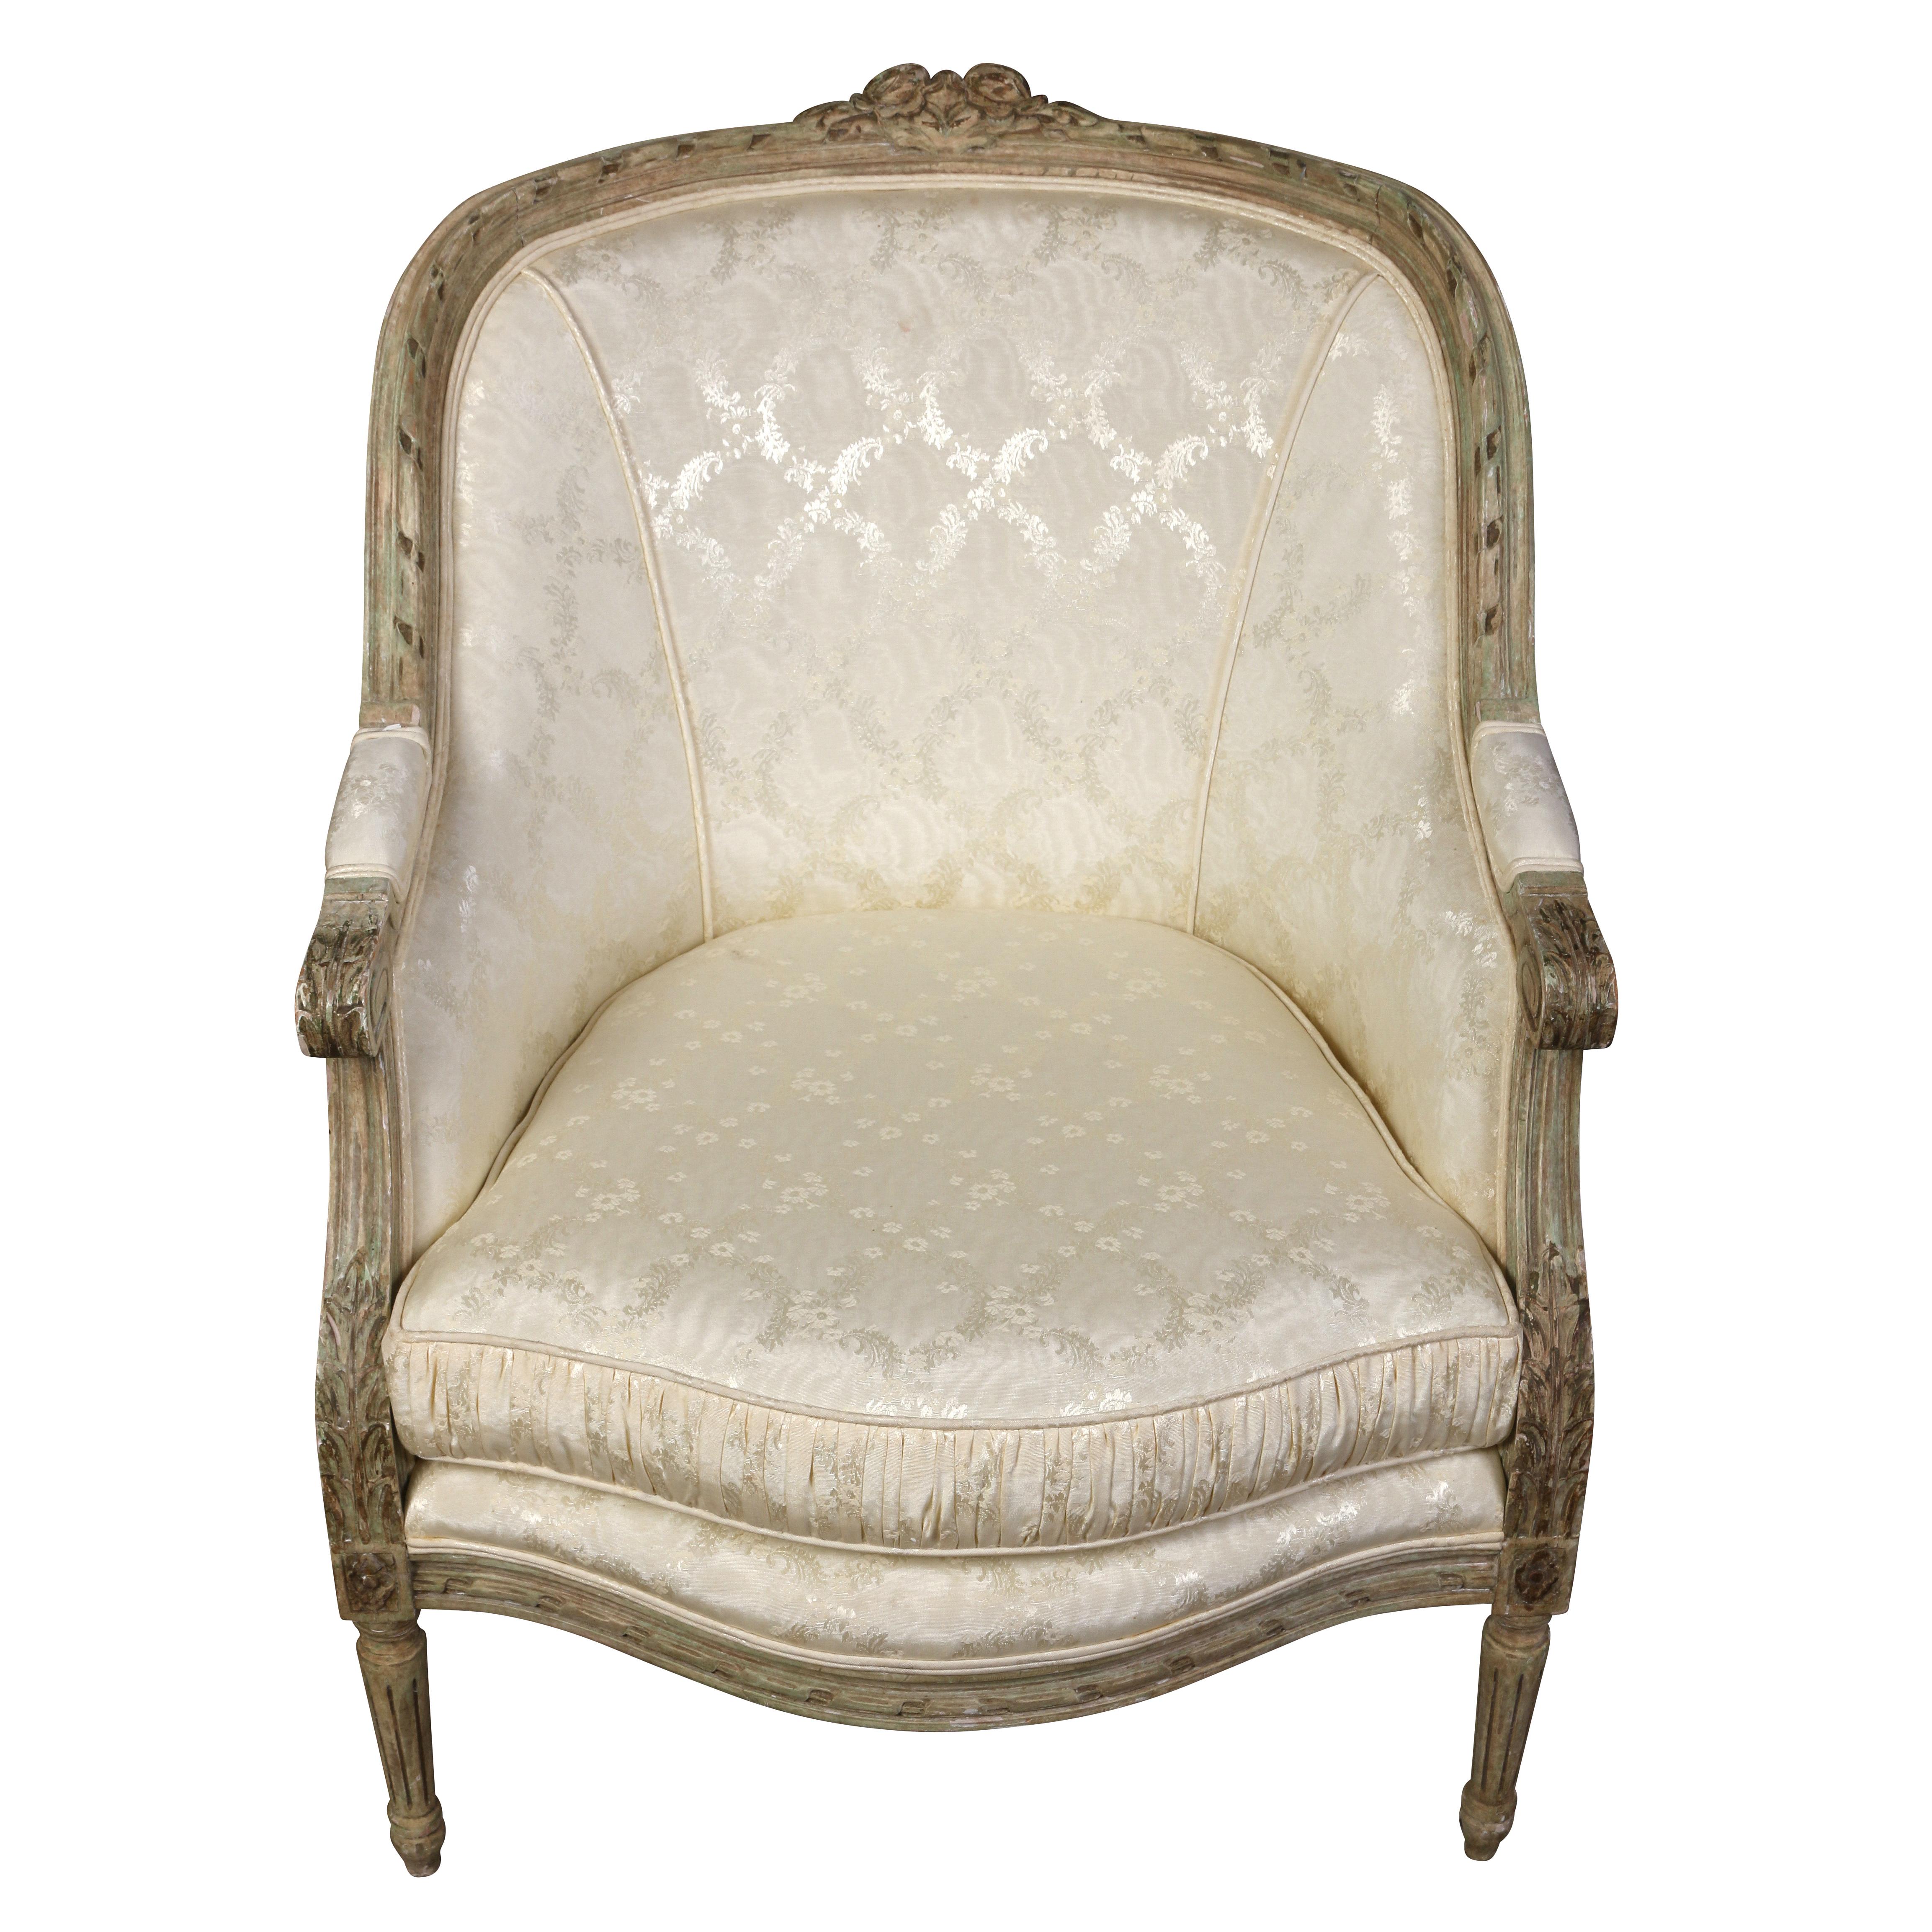 A pair of Louis XVI style painted bergères with a tight, rounded back and a loose seat cushion. Typical of the Louis XVI style, the chairs feature lovely carved details on the top and on apron, and fluted, tapered legs.